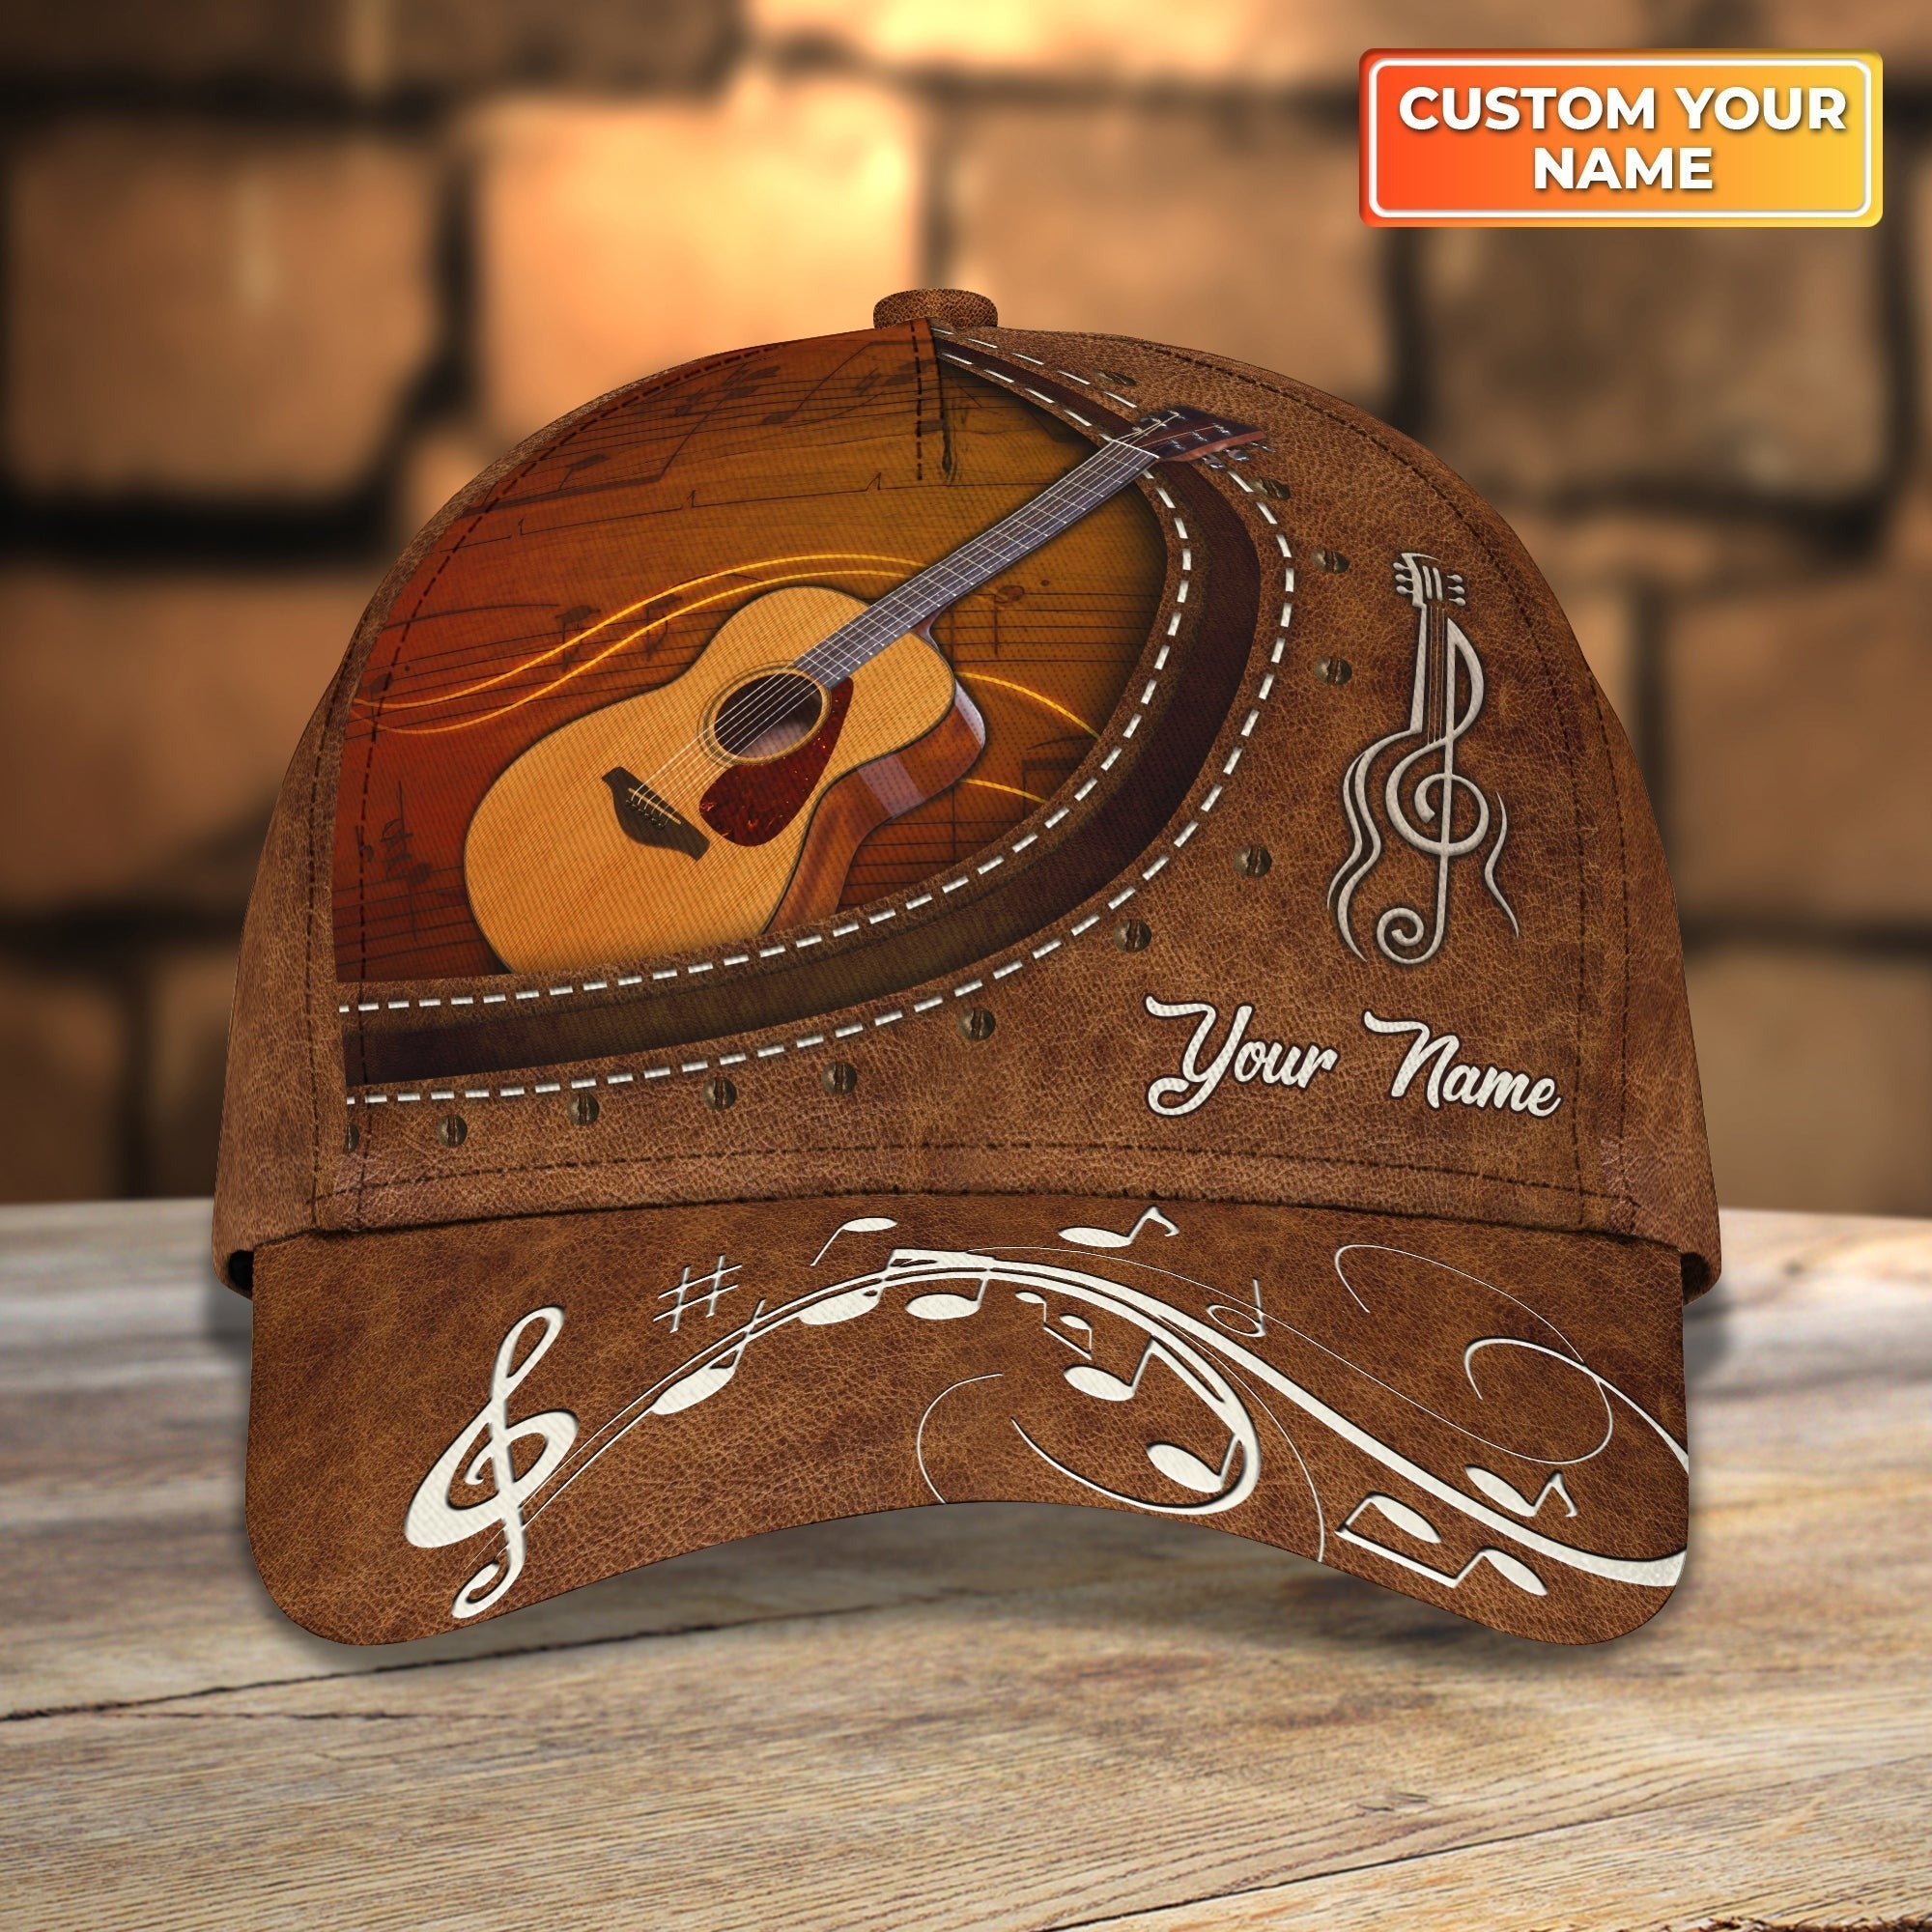 Customized Guitar Classic Baseball 3D Cap For Guitarist/ Lord Of The String All Over Print Guitar Cap Hat